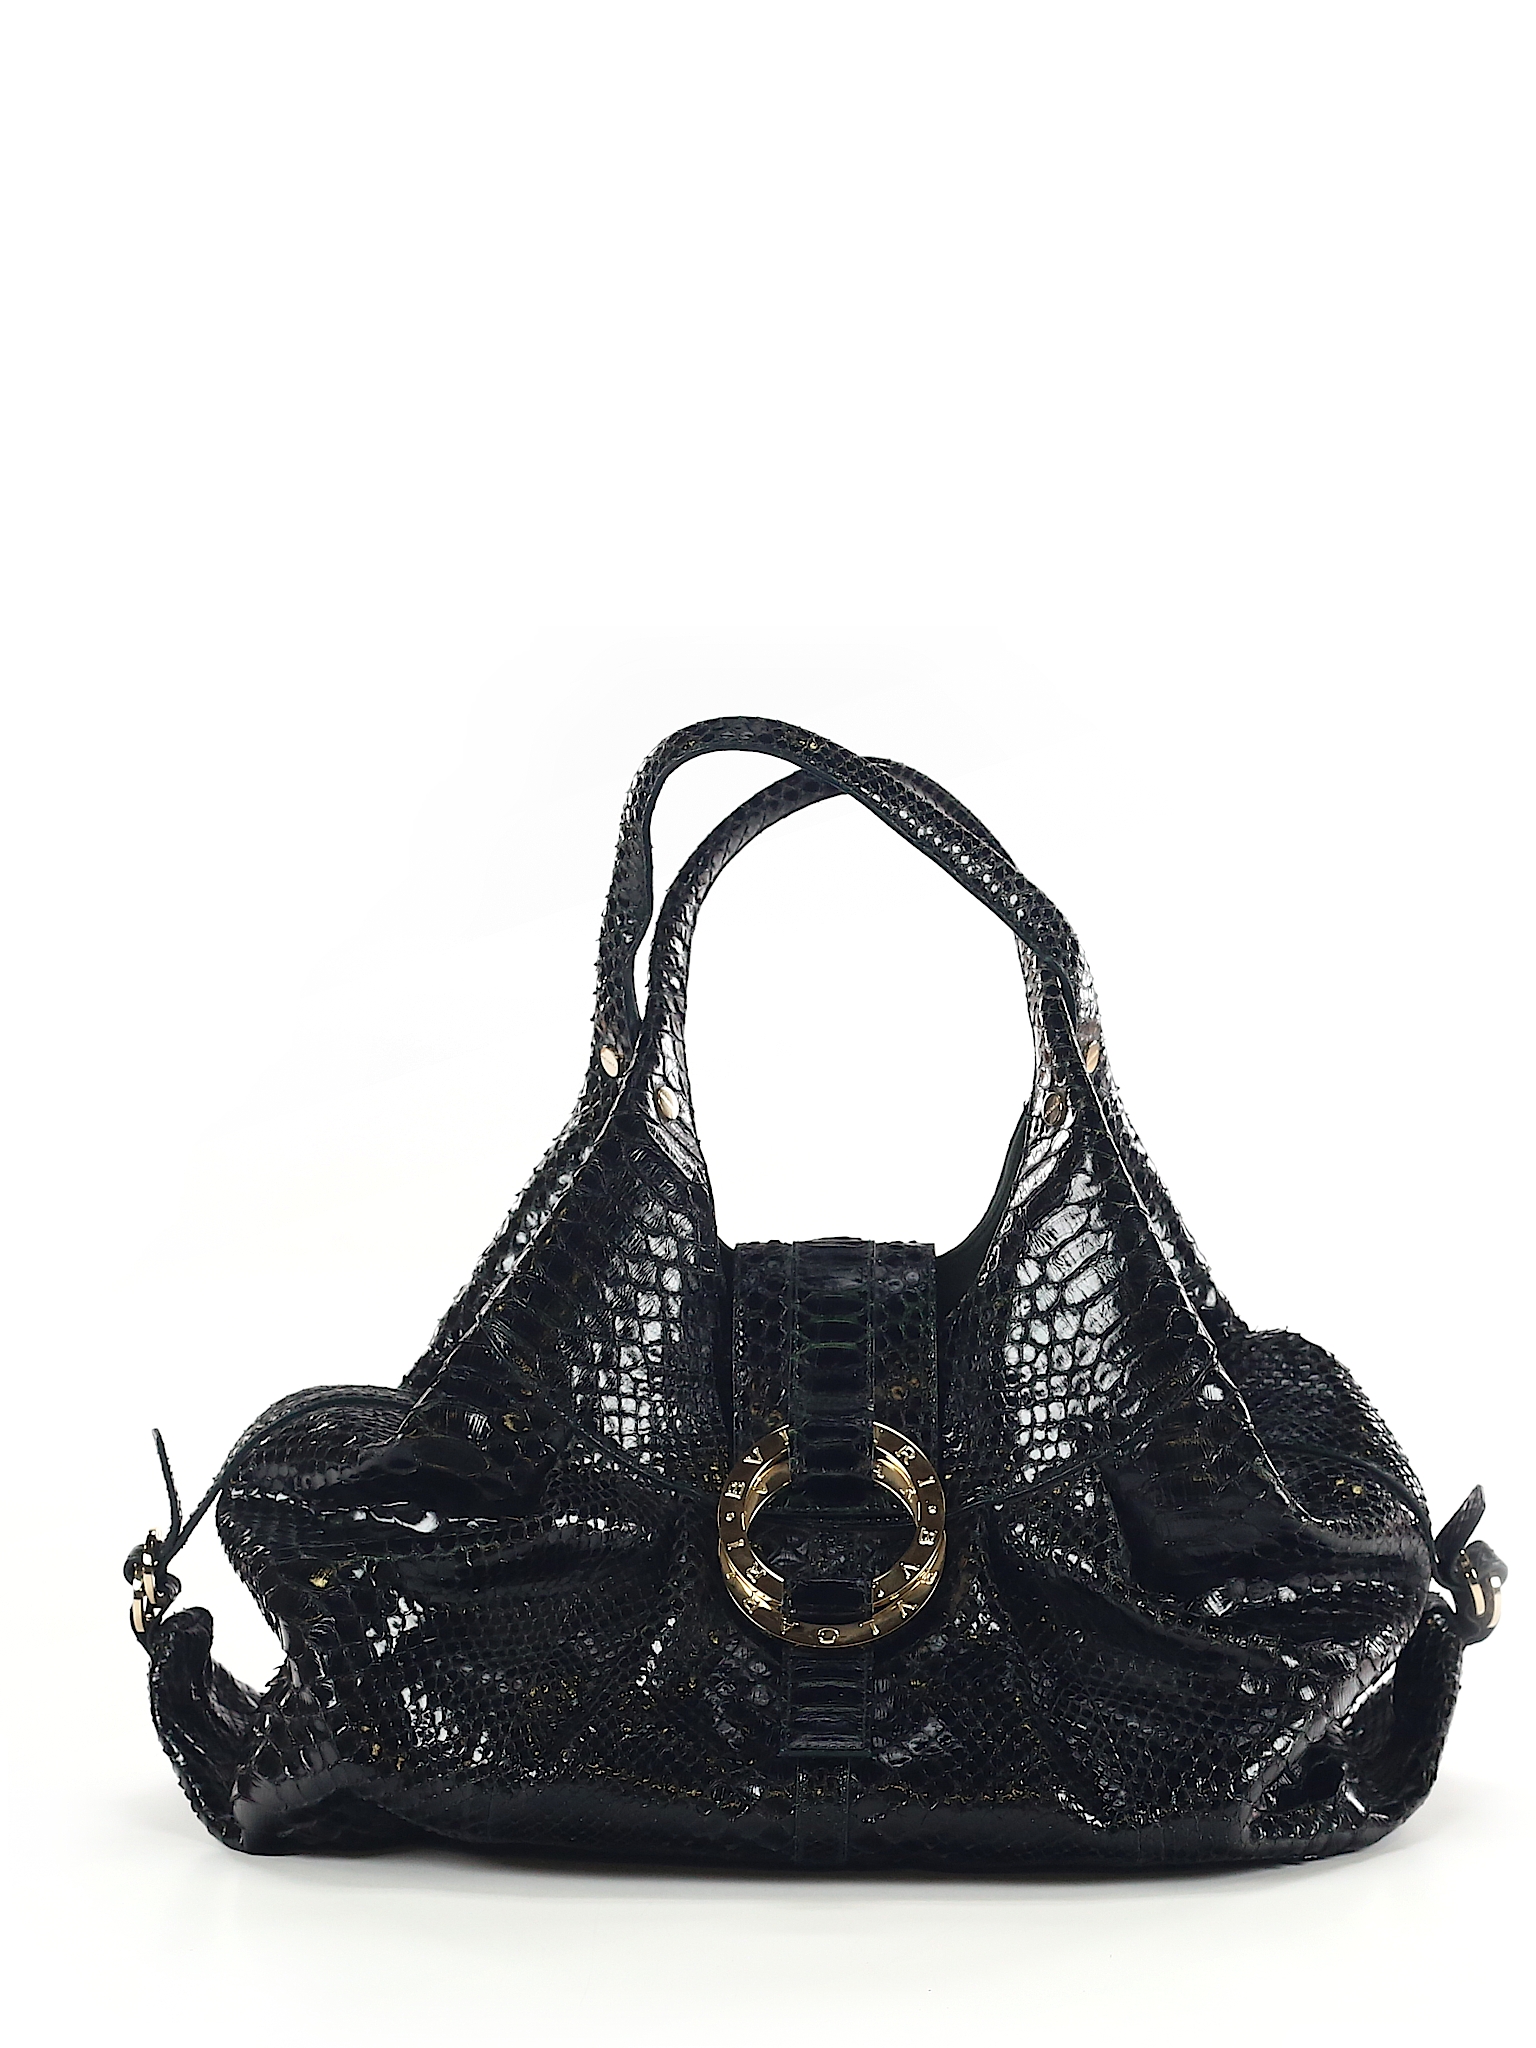 Bvlgari 100% Snakeskin Solid Black Leather Satchel One Size - 78% off ...